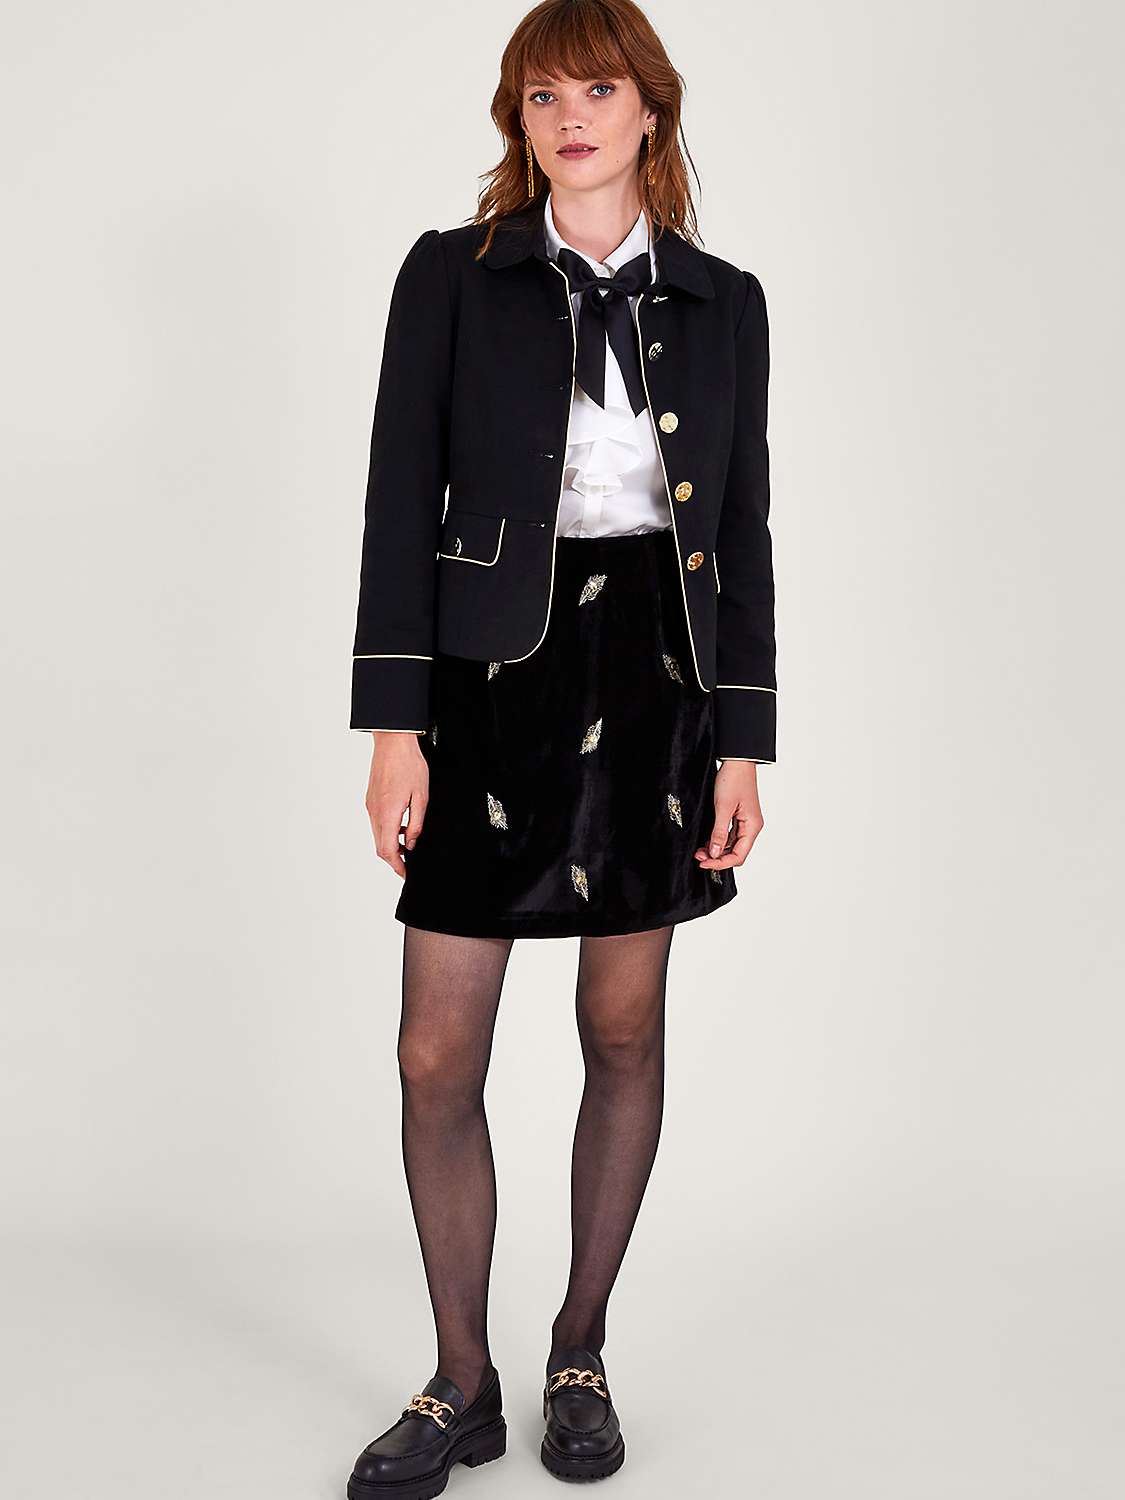 Buy Monsoon Collared Gold Button Piping Detail Jacket, Black Online at johnlewis.com